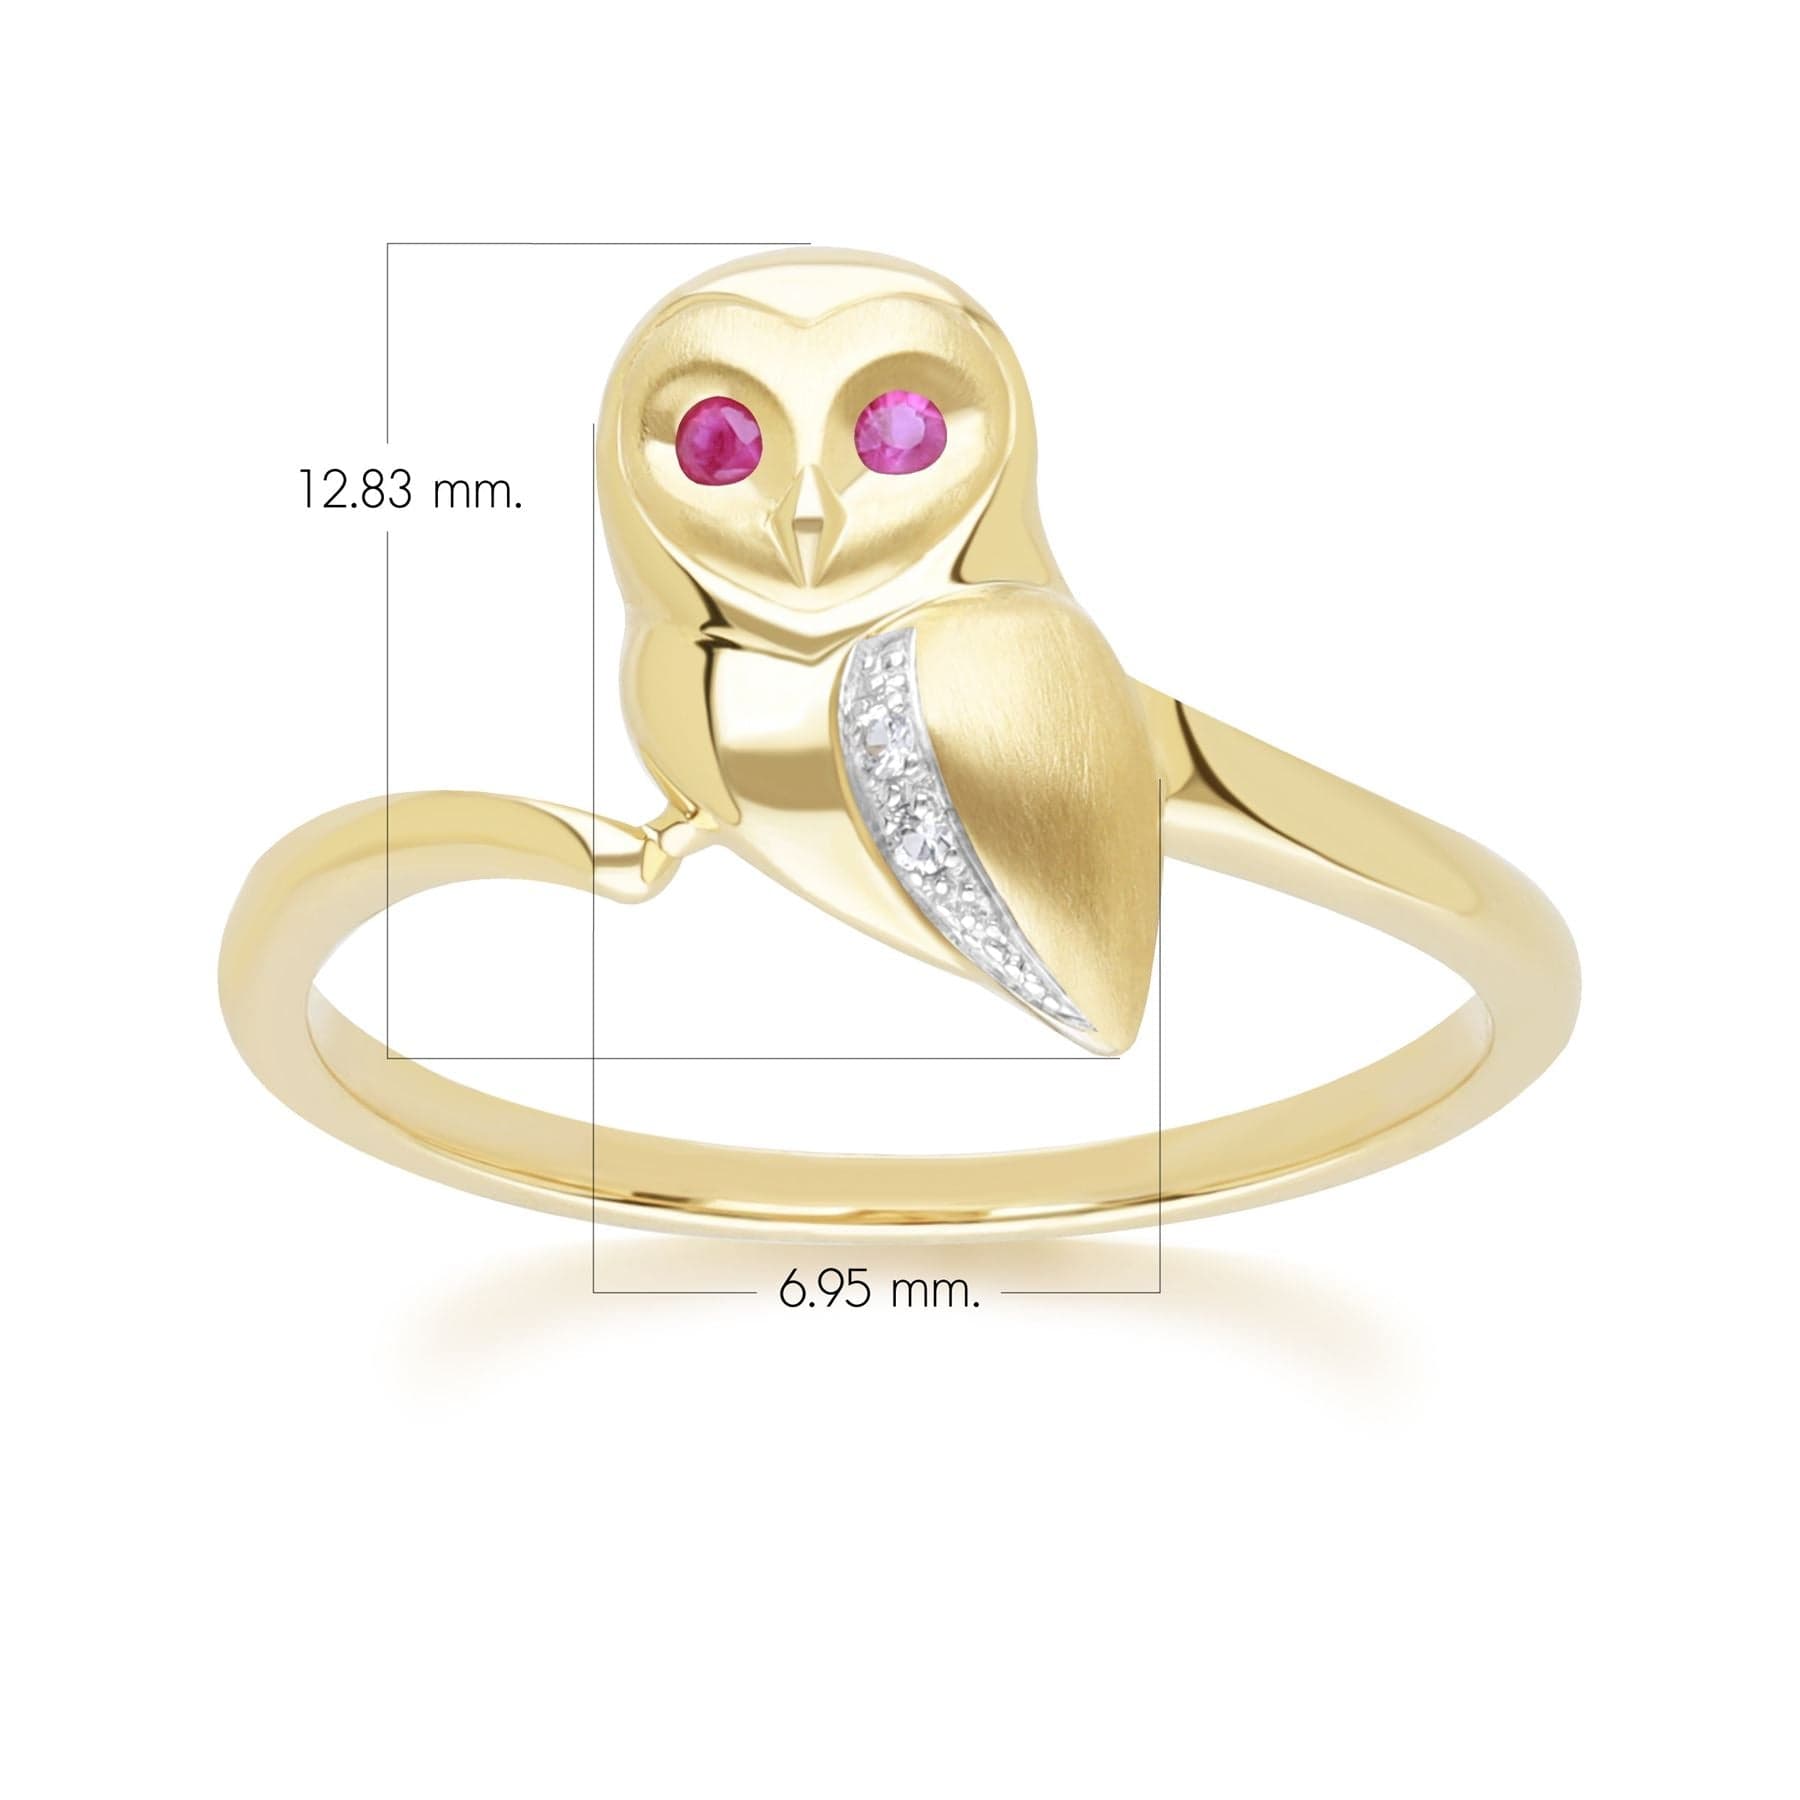 135R2103019 Gardenia Ruby and White Sapphire Owl Ring in 9ct Yellow Gold Dimensions